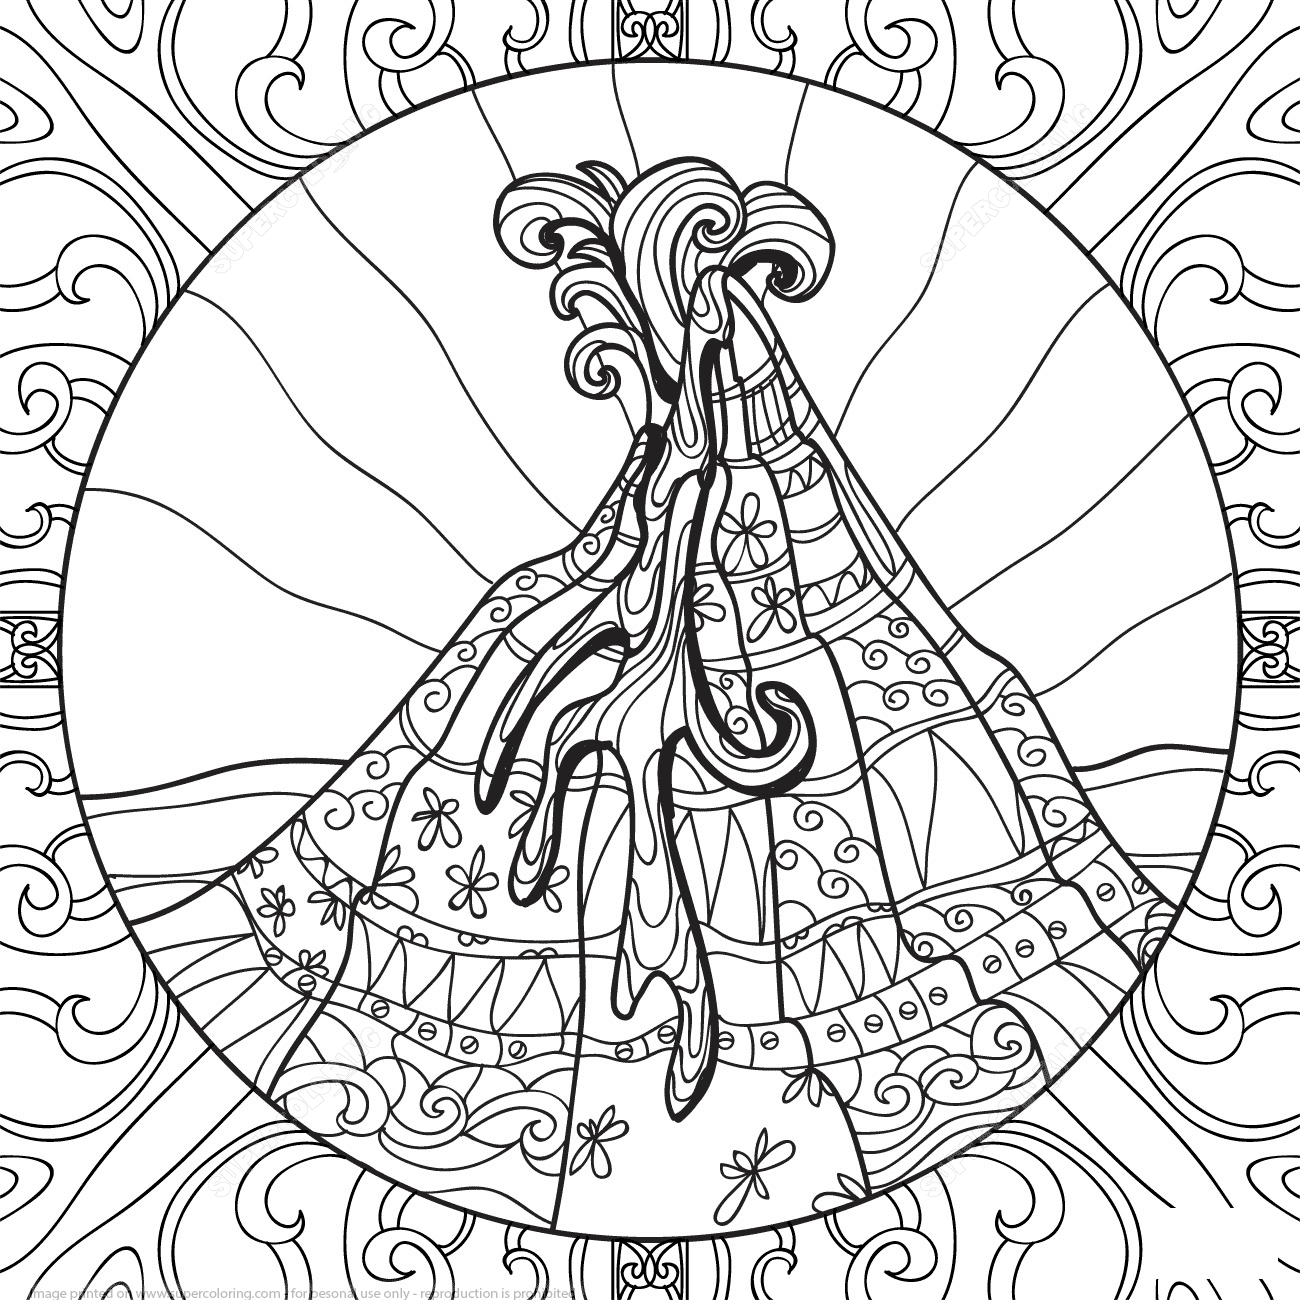 Volcano Zentangle Adults Coloring Pages - Coloring Cool